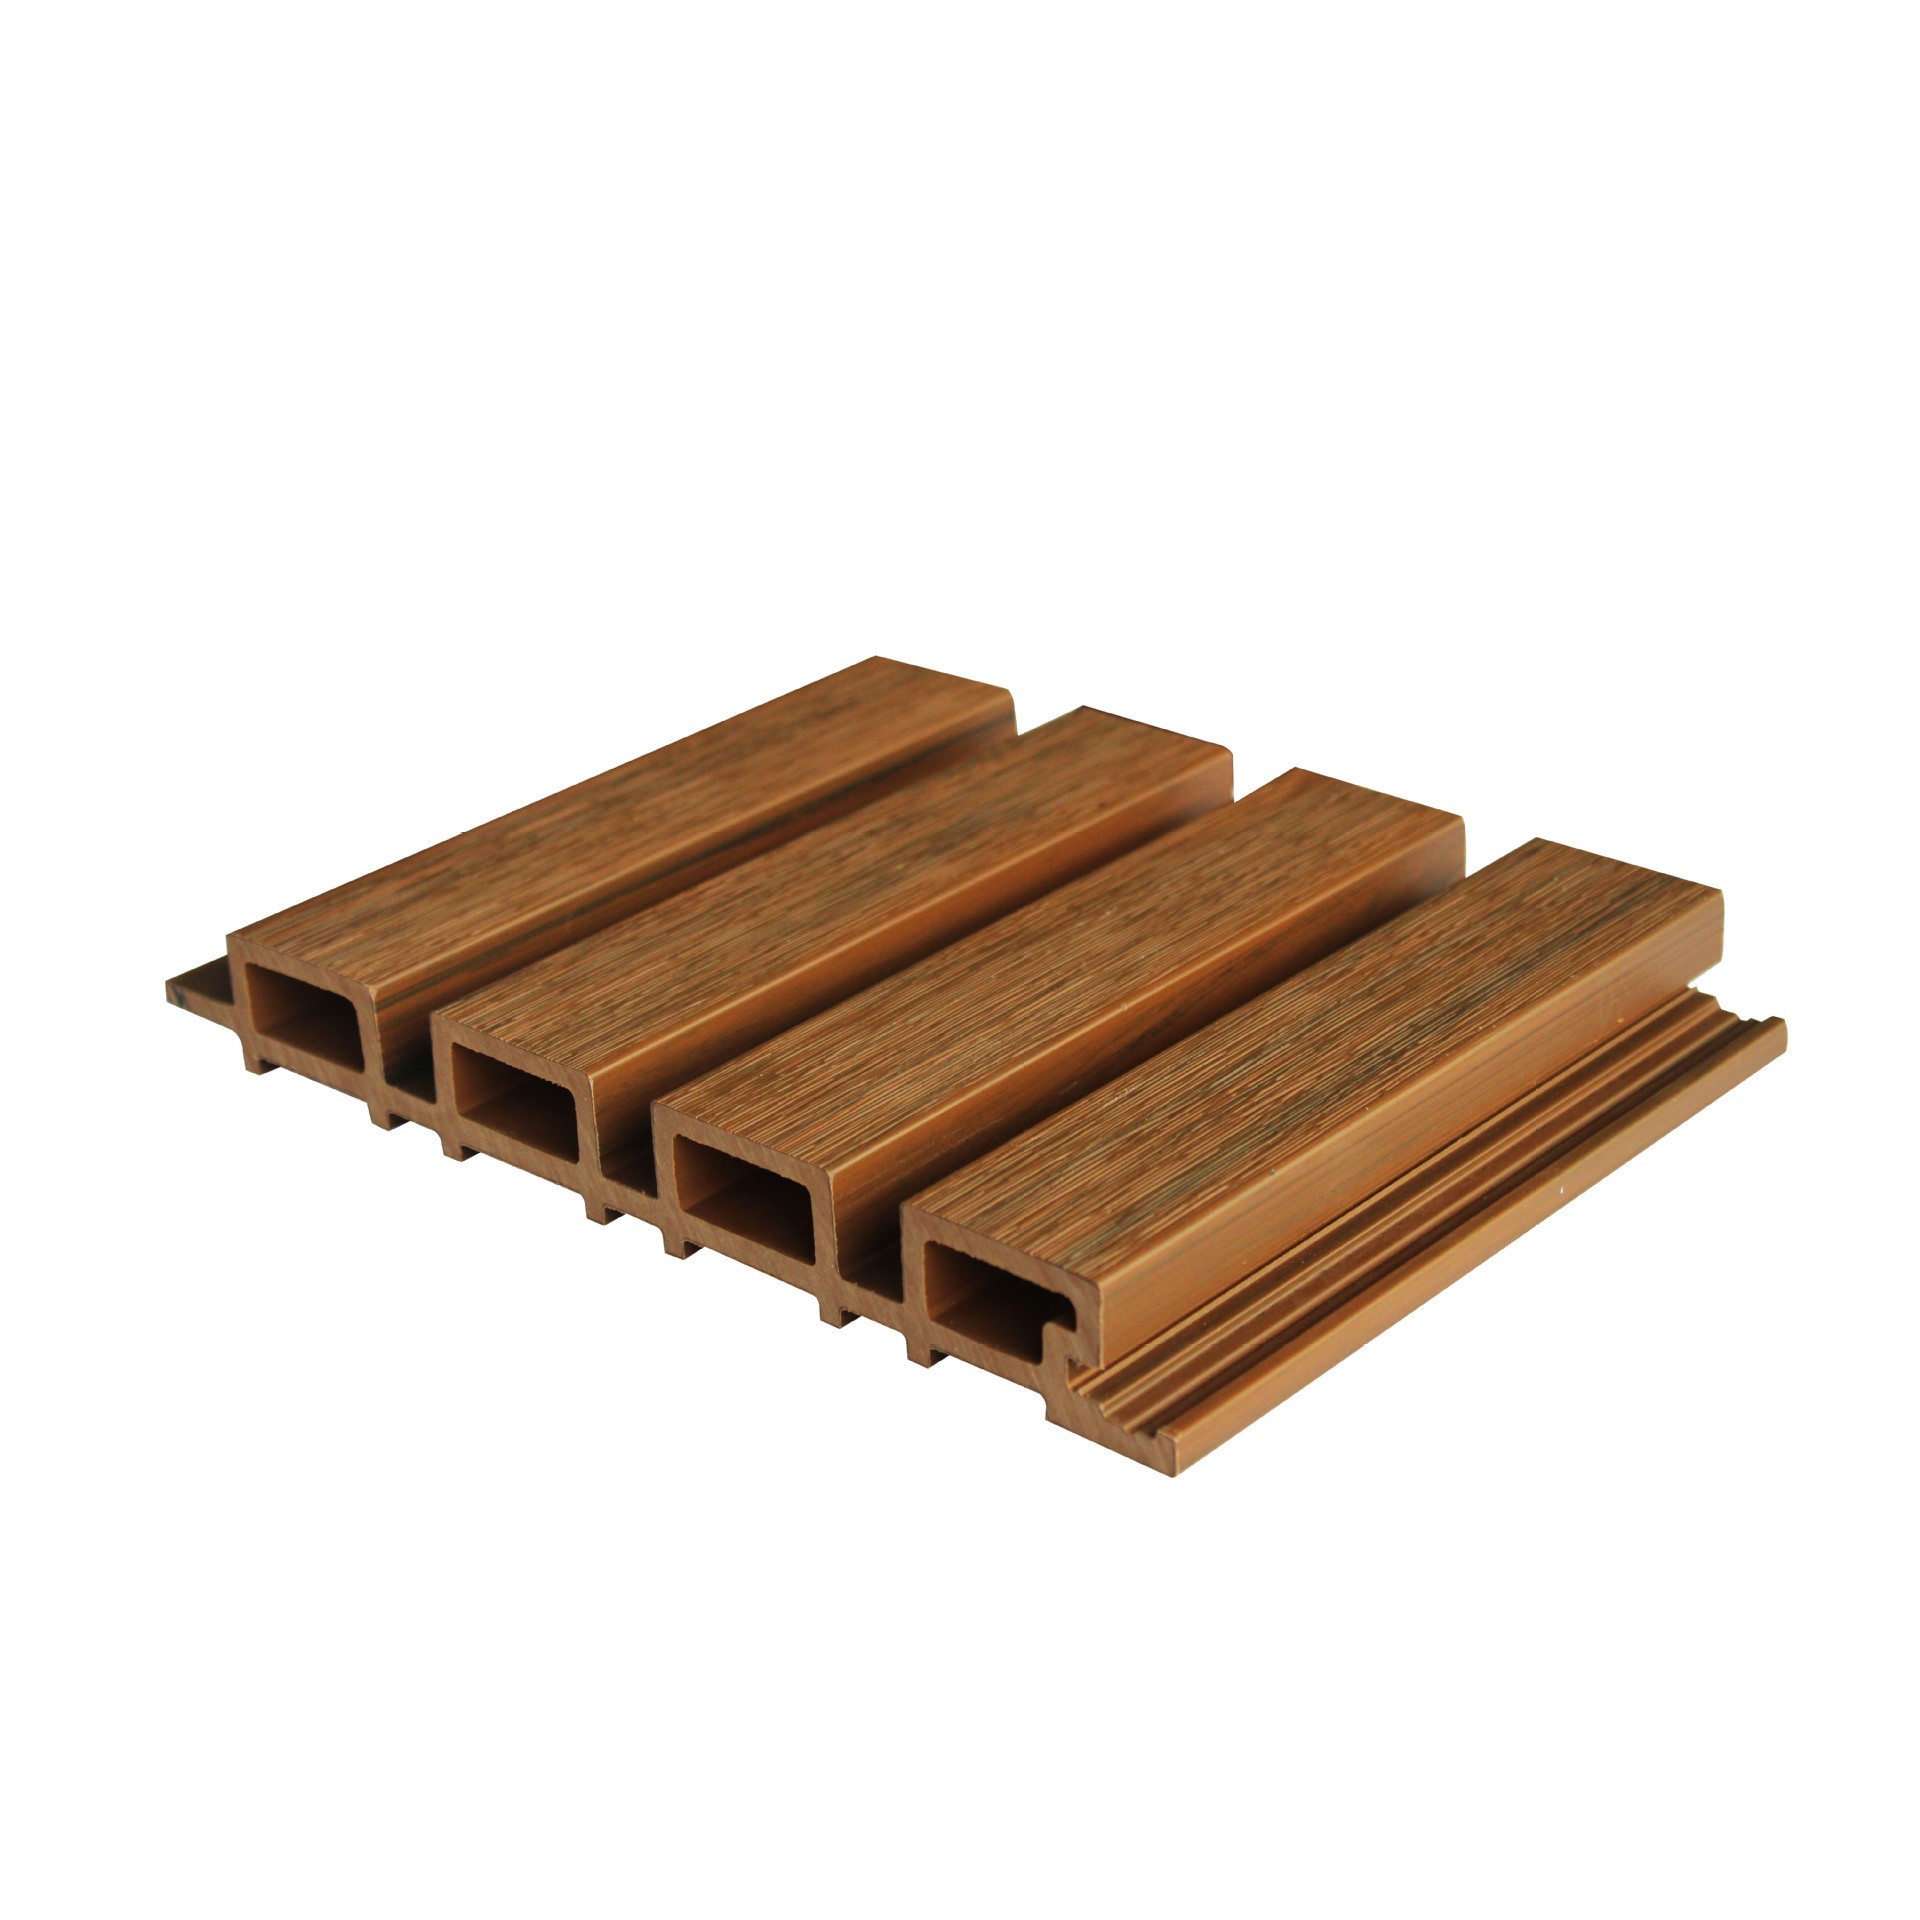 Sound Absorbing Wpc Decking Decorative Acoustic Soundproofing Wood Panels